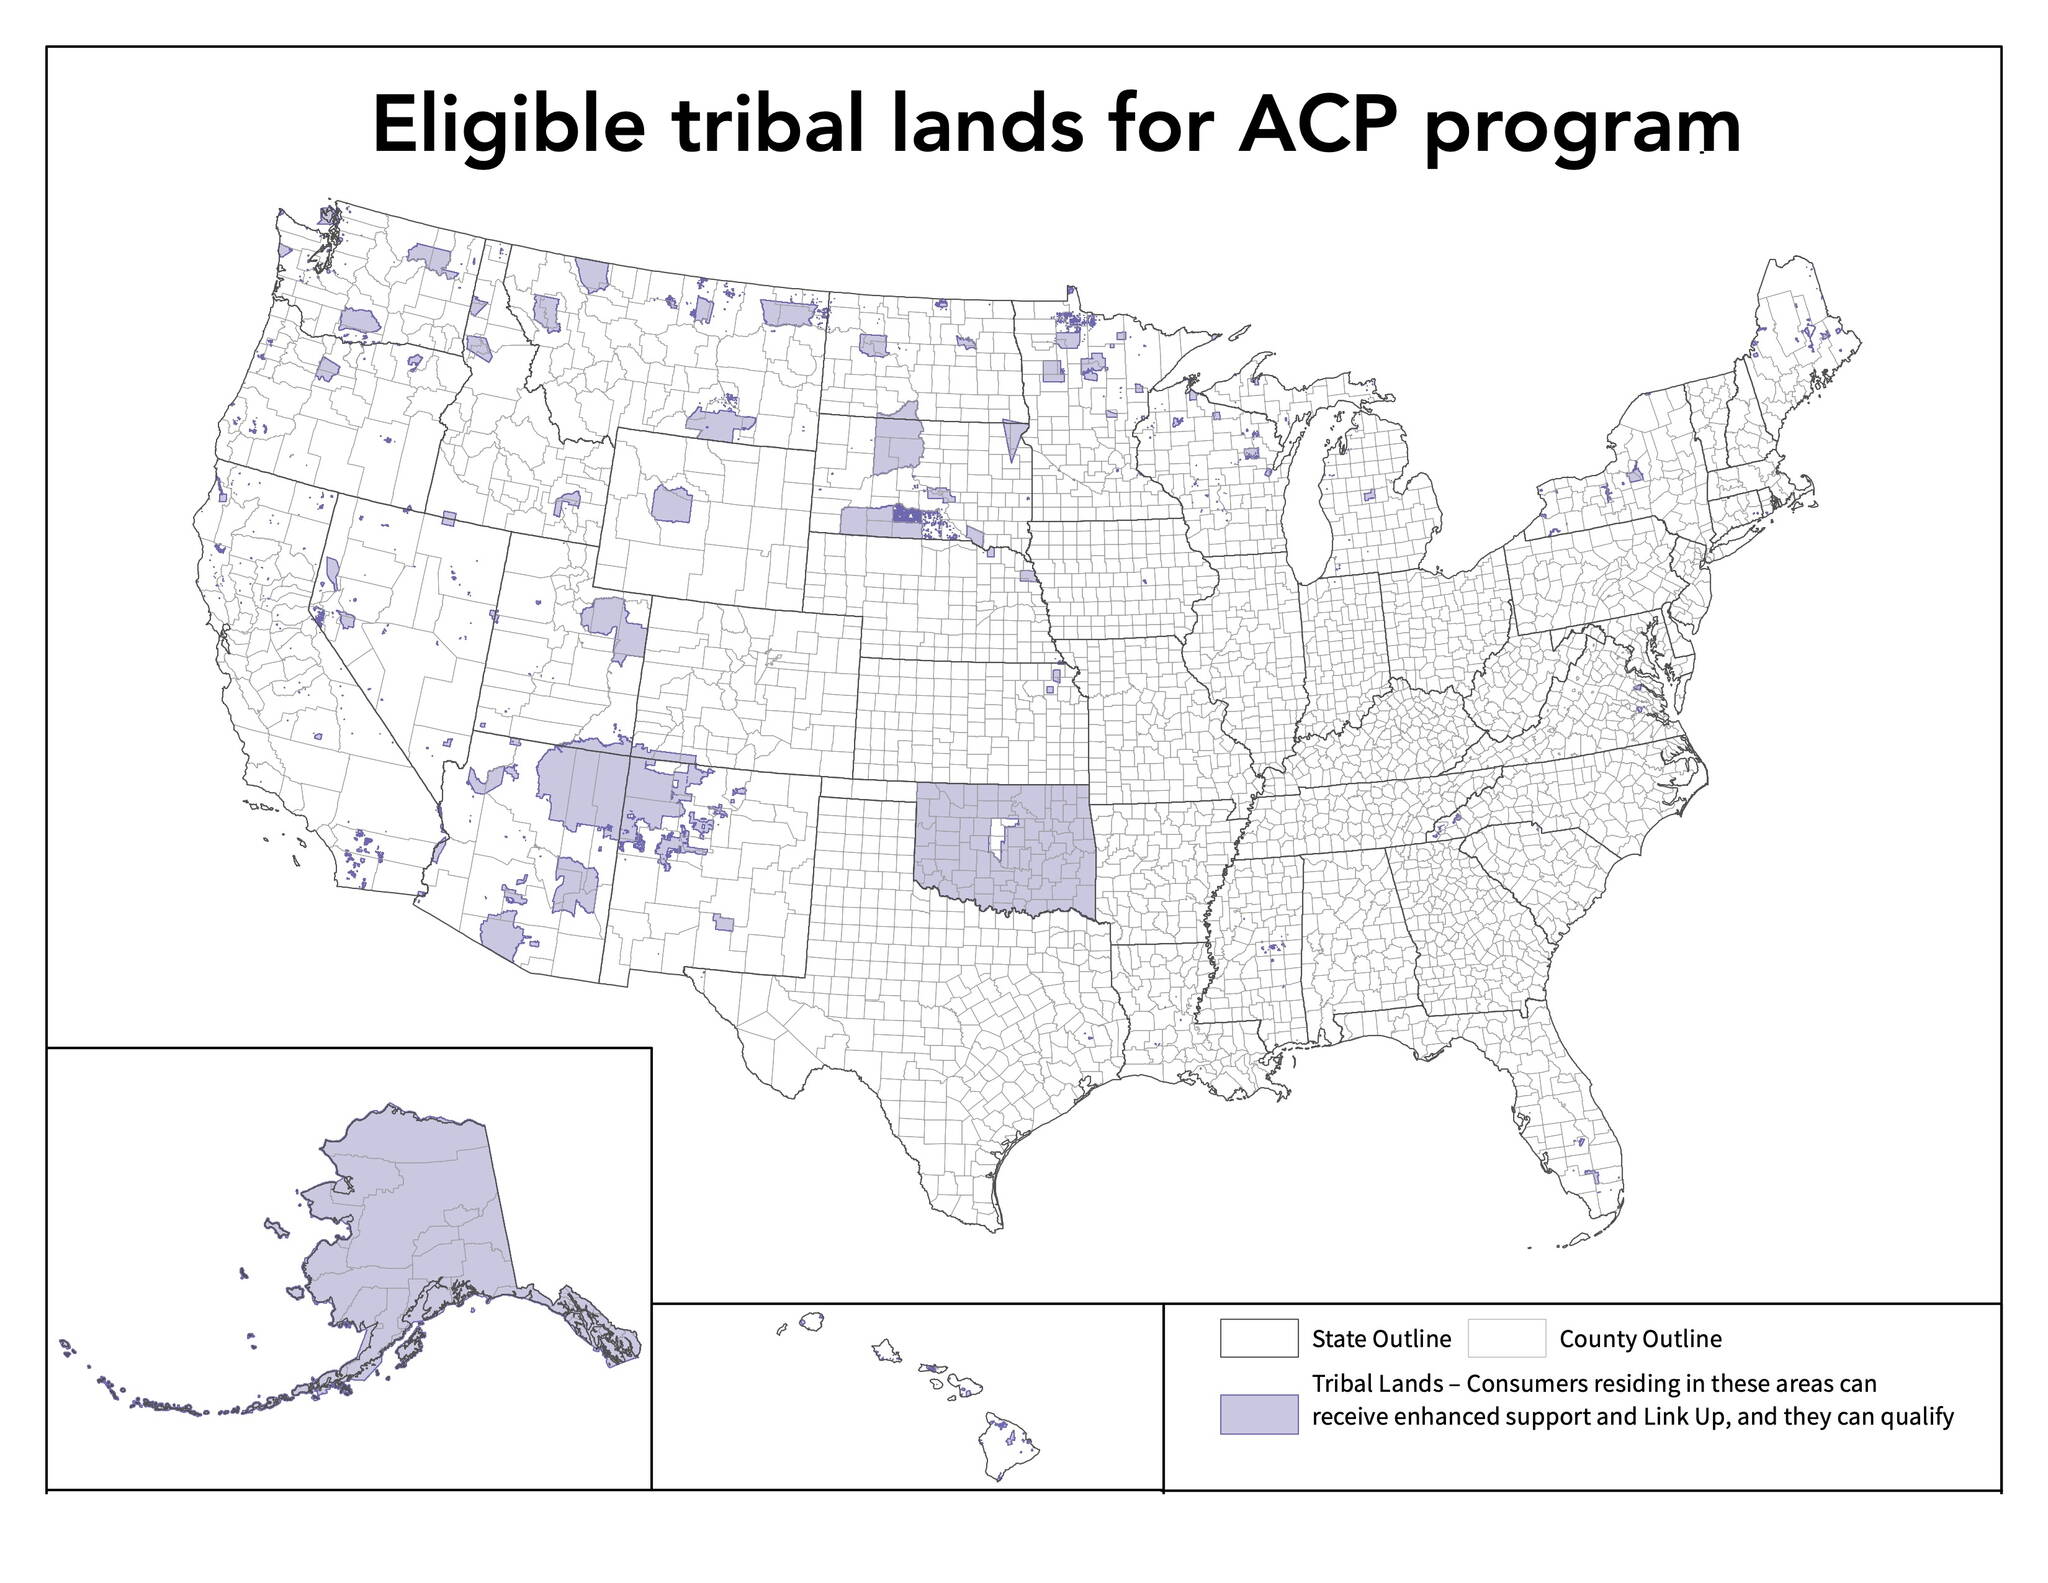 A map shows locations in the U.S. designated as tribal lands and thus eligible for higher benefits from the Affordable Connectivity Program. All of Alaska falls under that designation. (Courtesy Image / FCC)